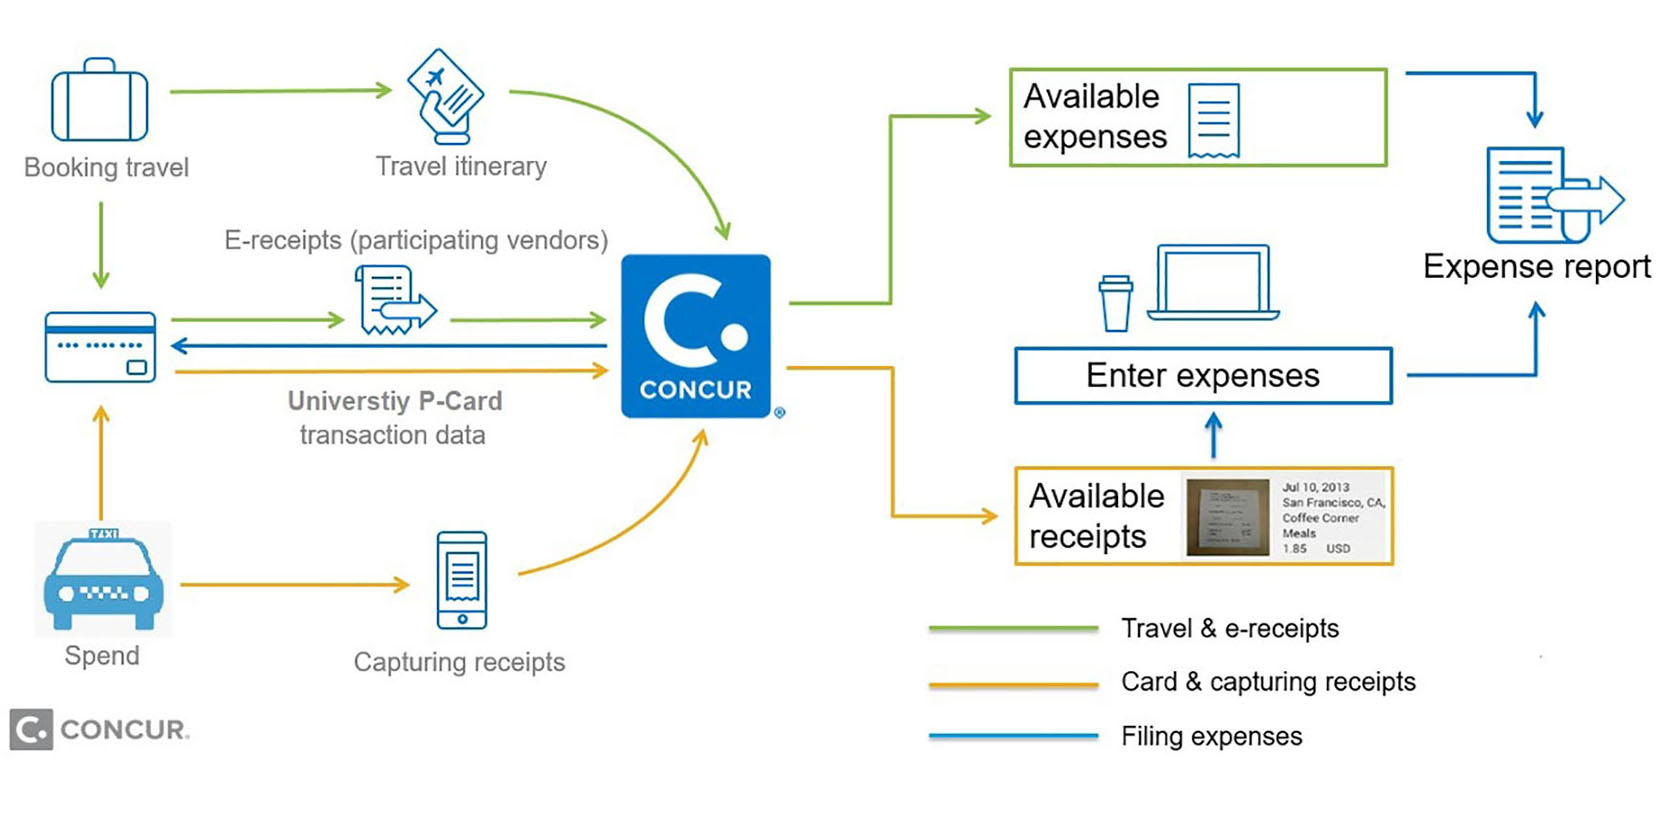 Image of Travel and Expense Process Diagram, Outline below image